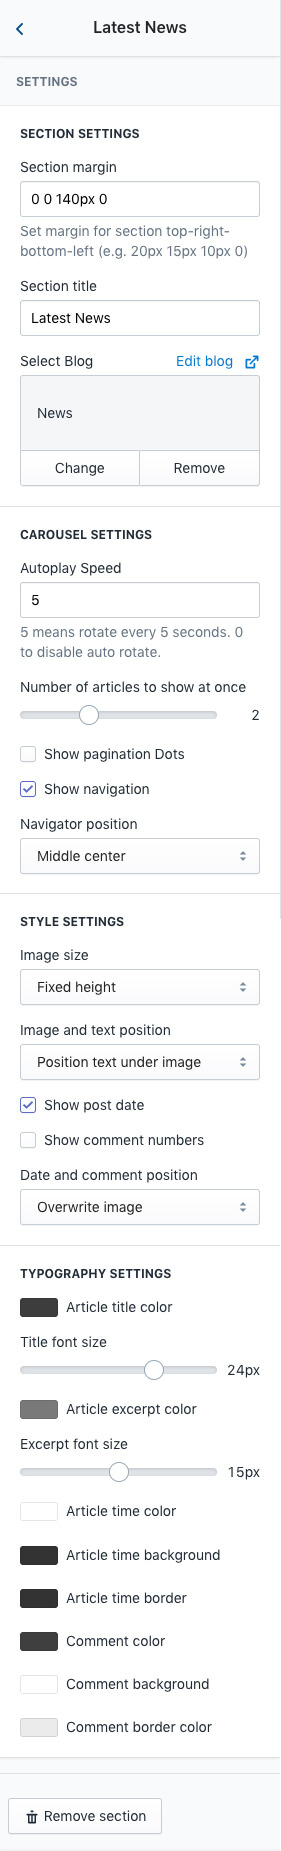 Blog posts section settings